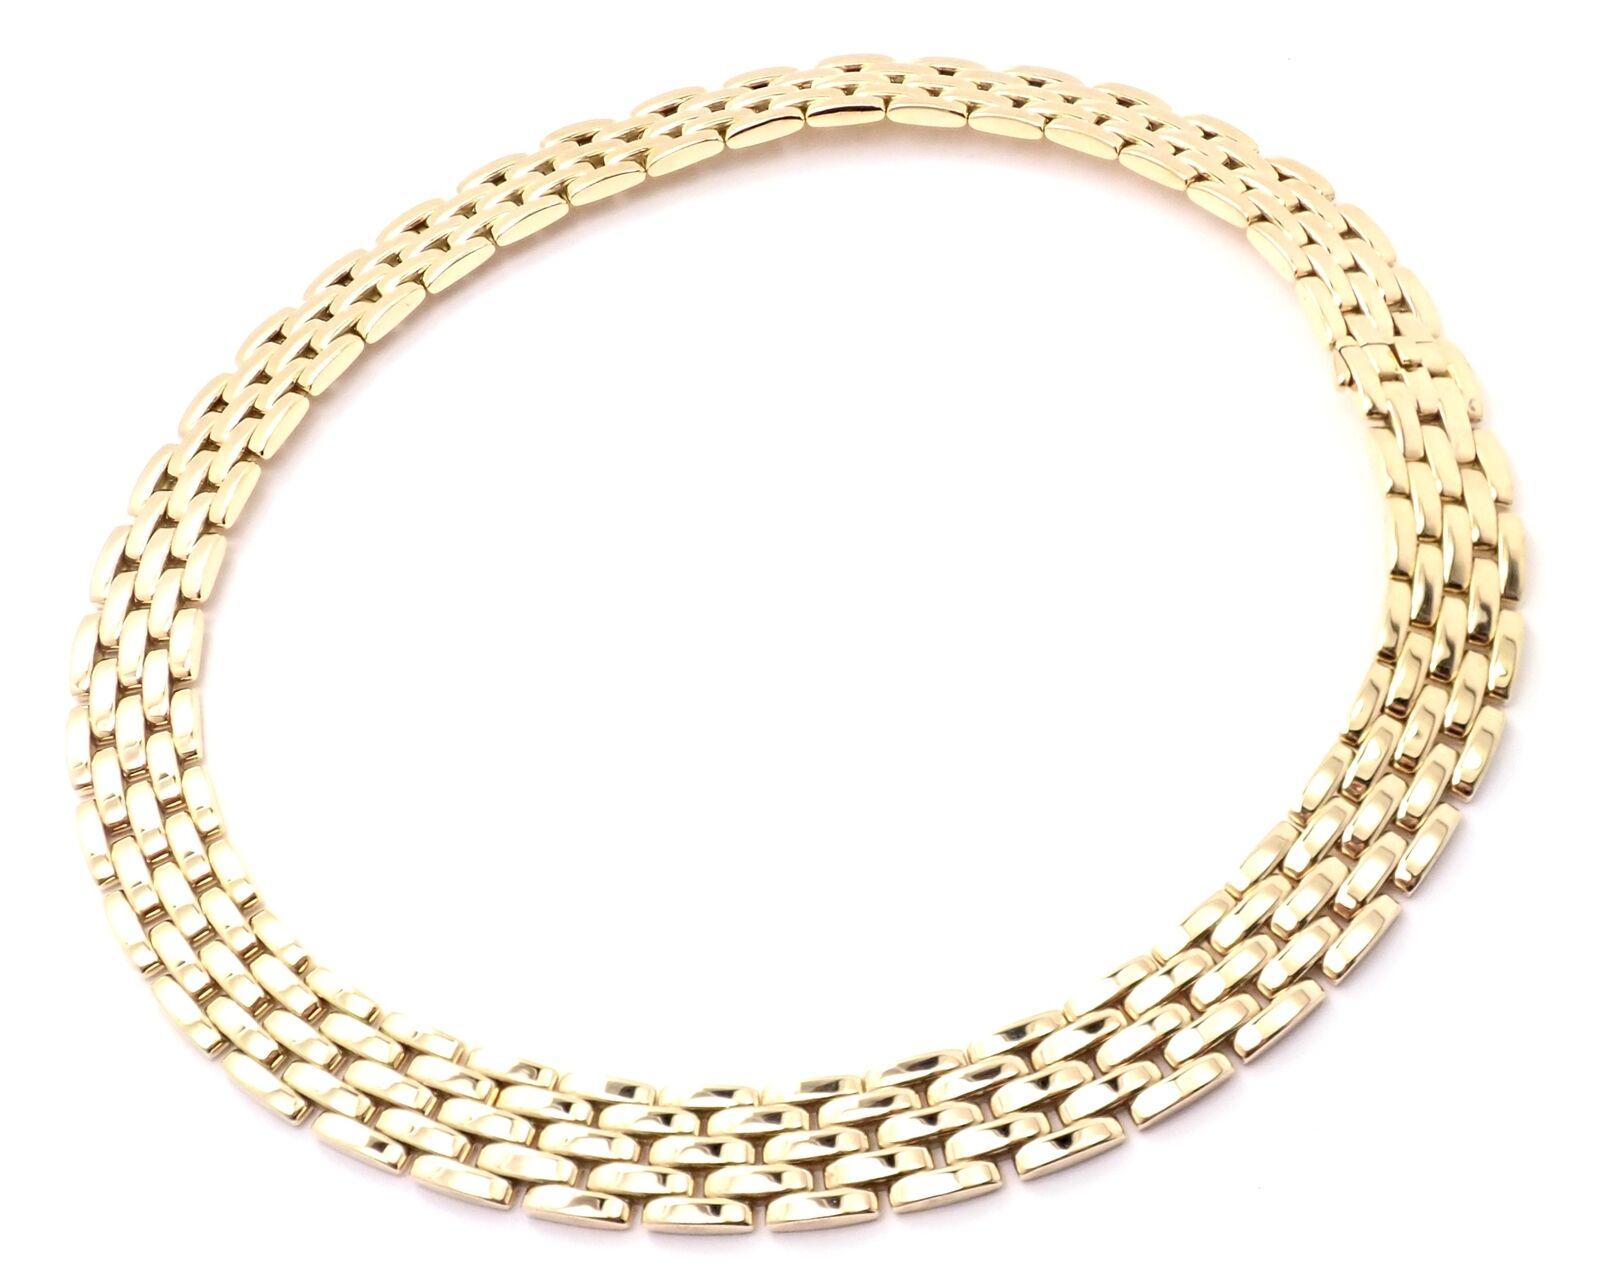 18k Yellow Gold Five-Row Maillion Panthere Necklace by Cartier.
This stunning necklace comes with an original Cartier box & Certificate.
Details:
Weight:  148.4 grams 
Length: 16.5